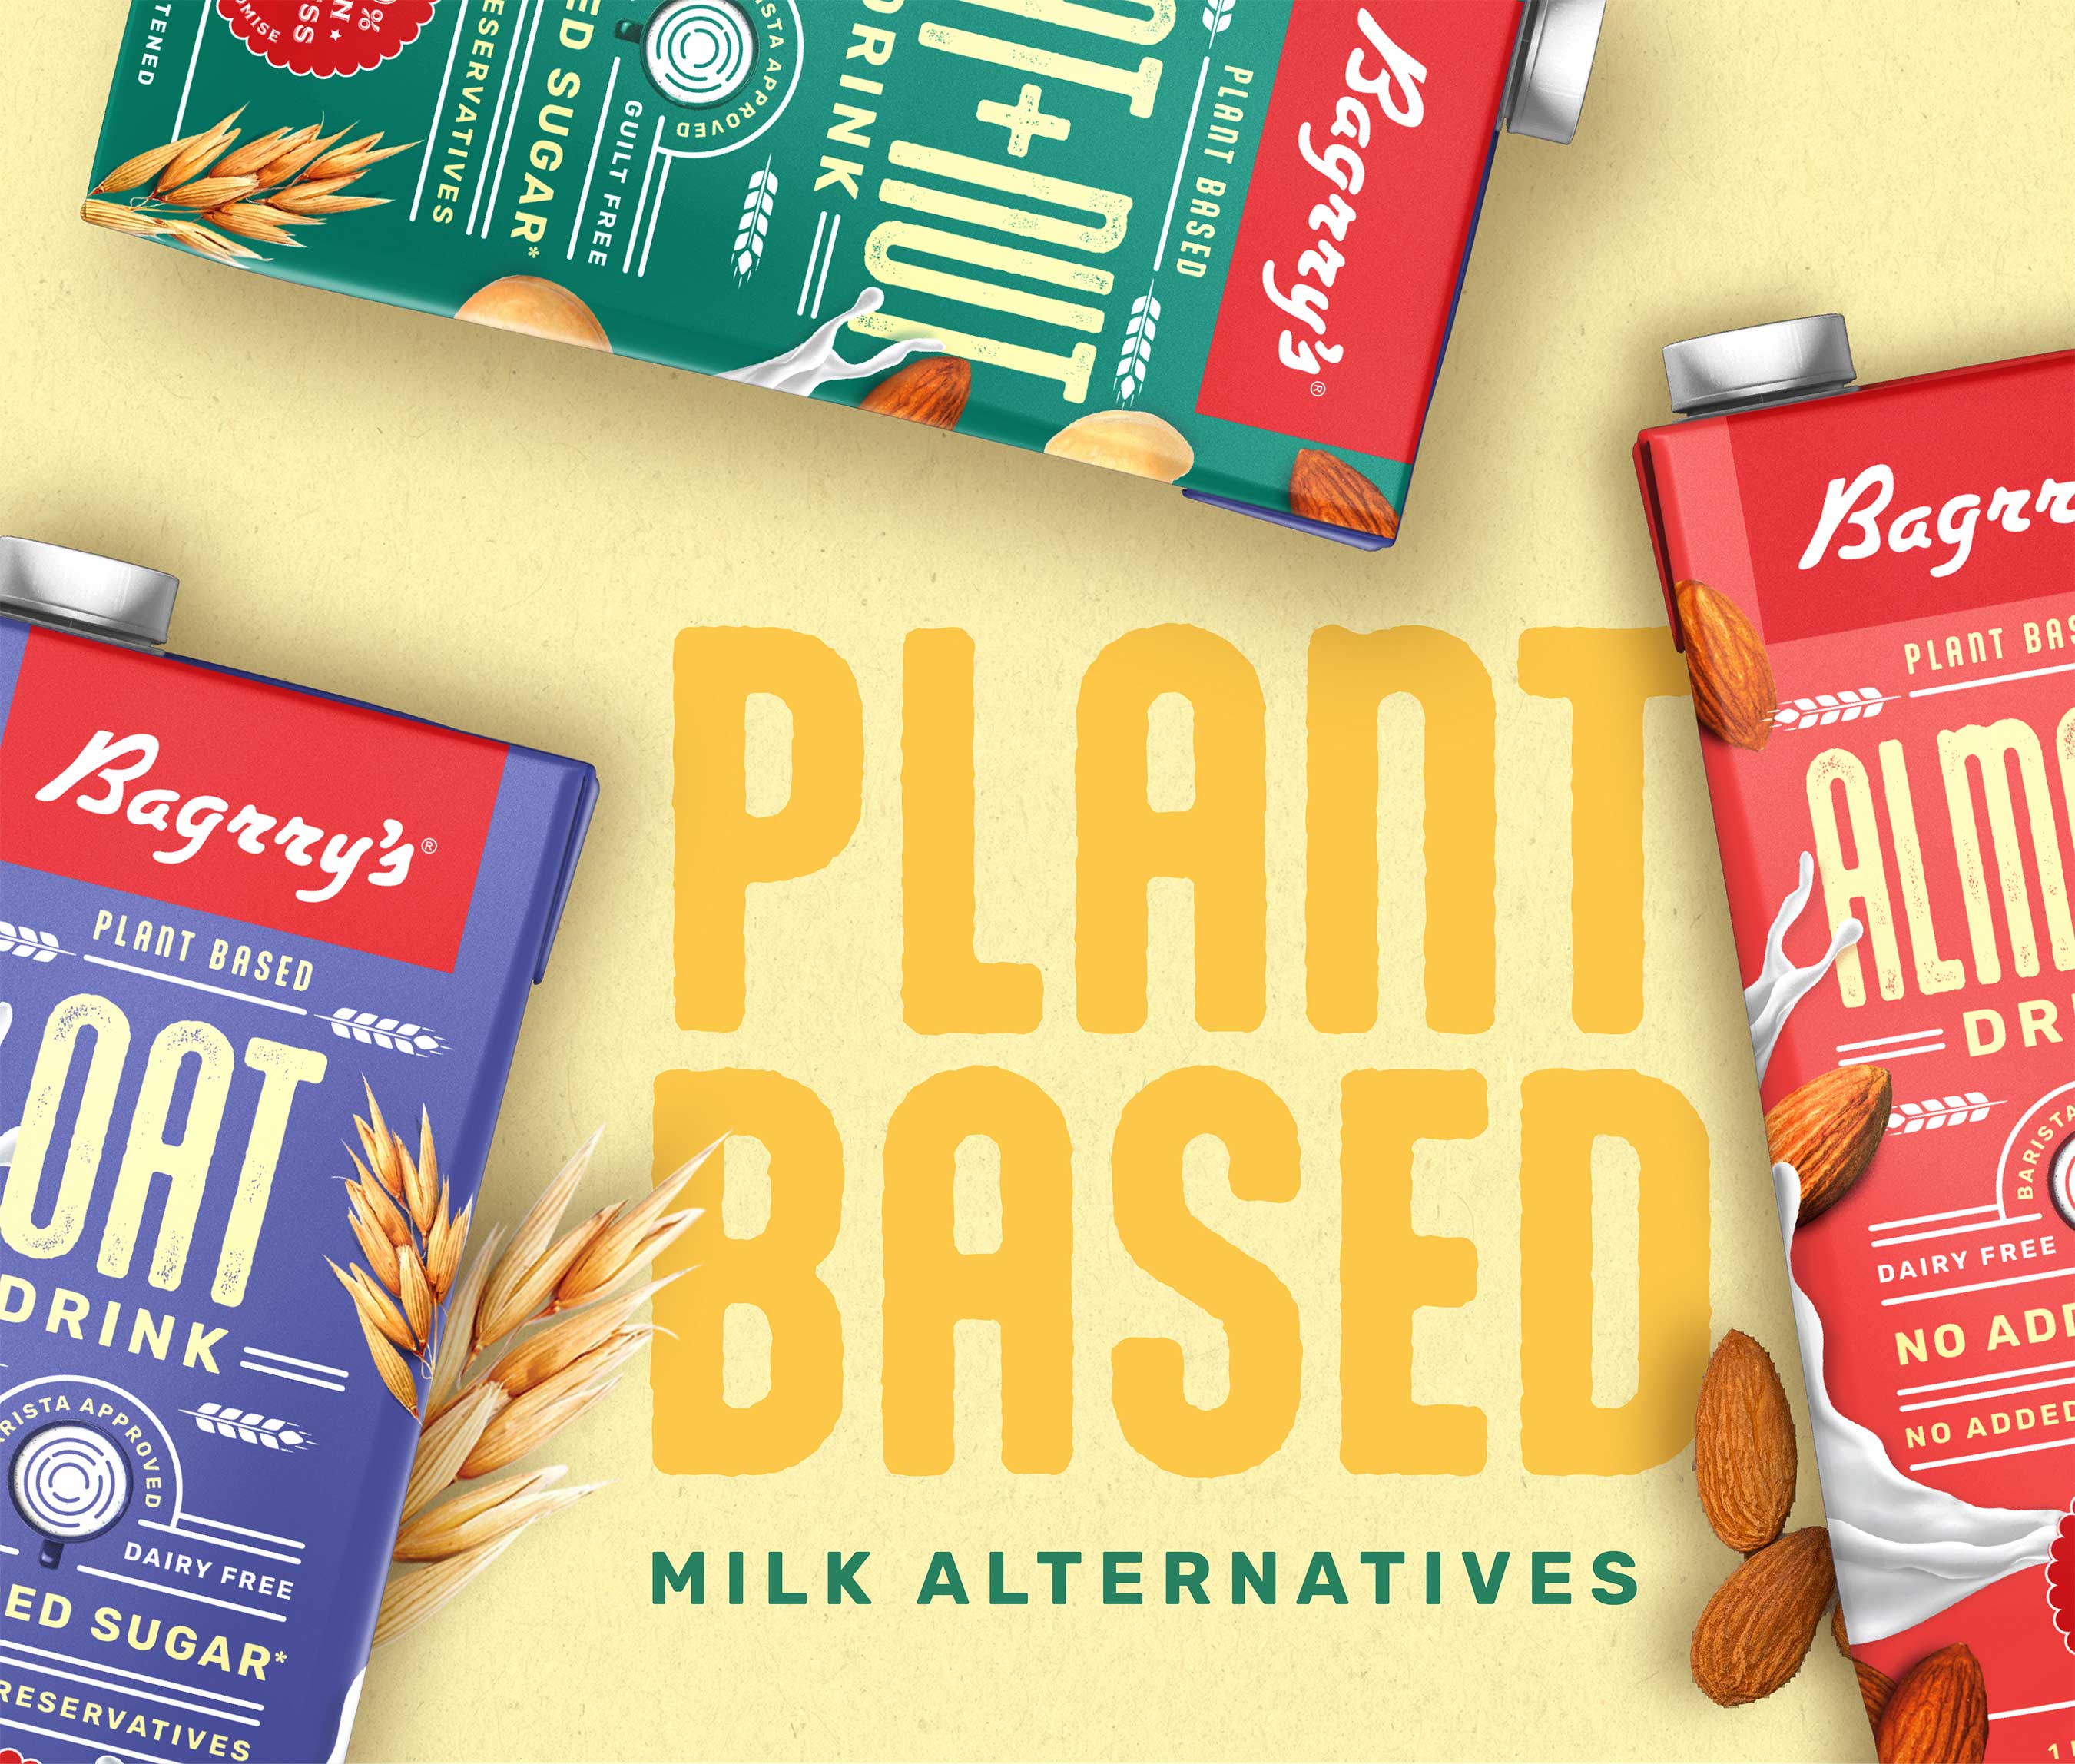 Bagrry’s Vegan Range Positioning and Packaging Strategy by Stratedgy